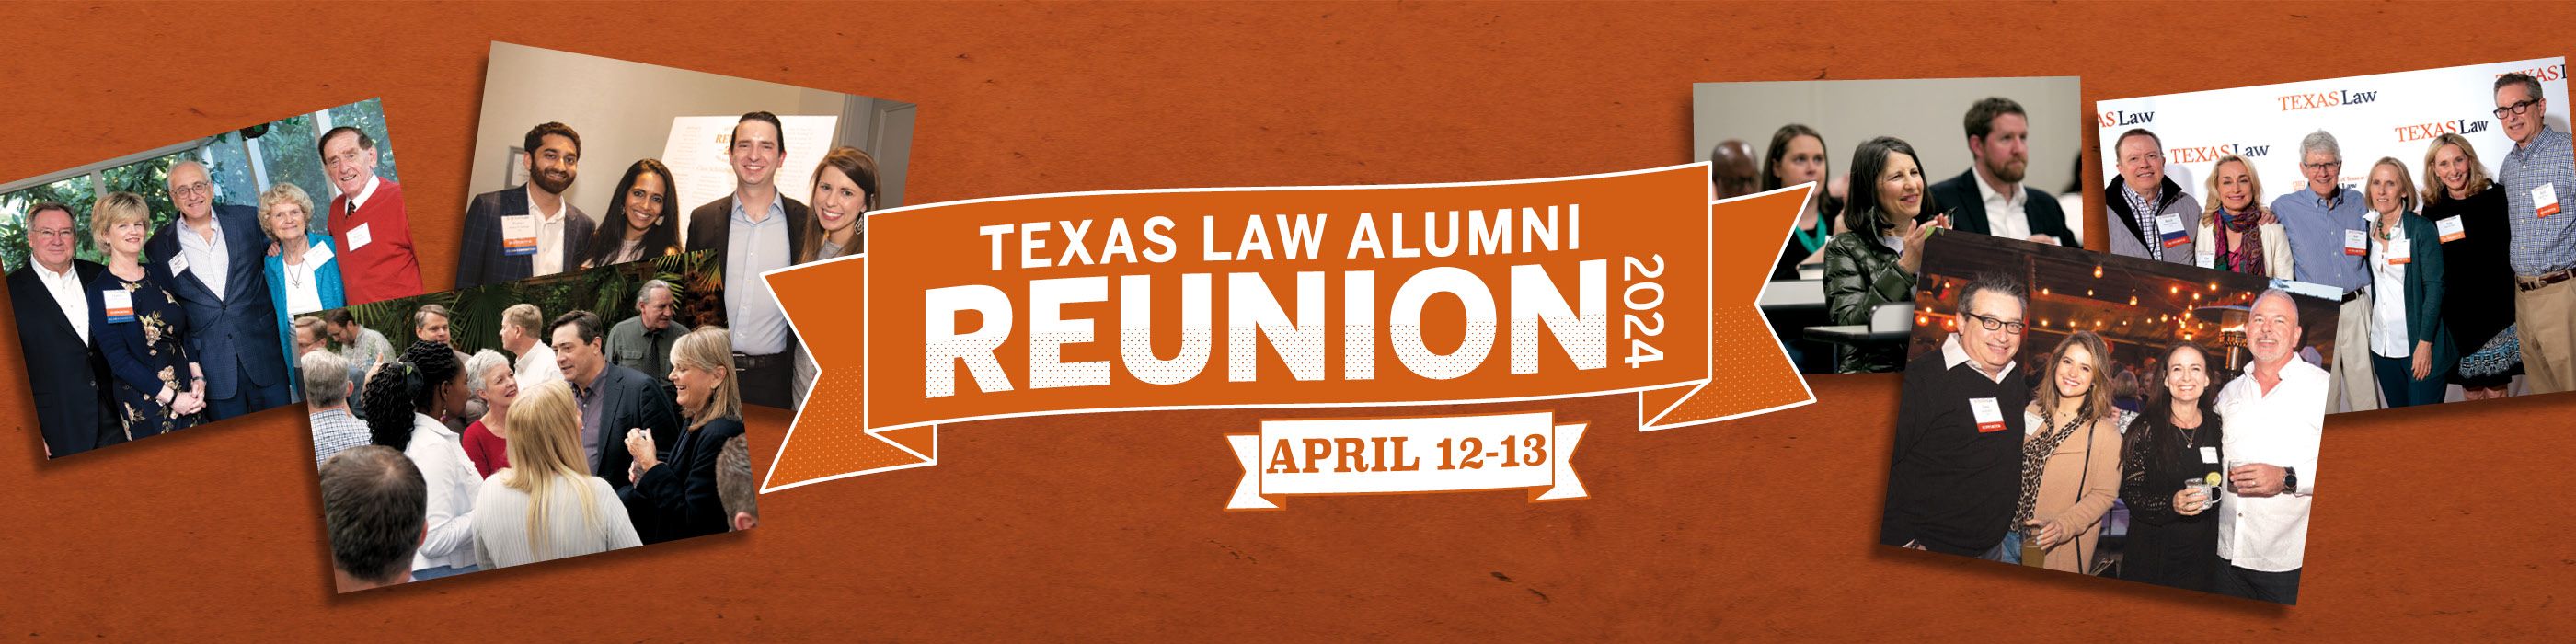 Texas Law Class of 2009